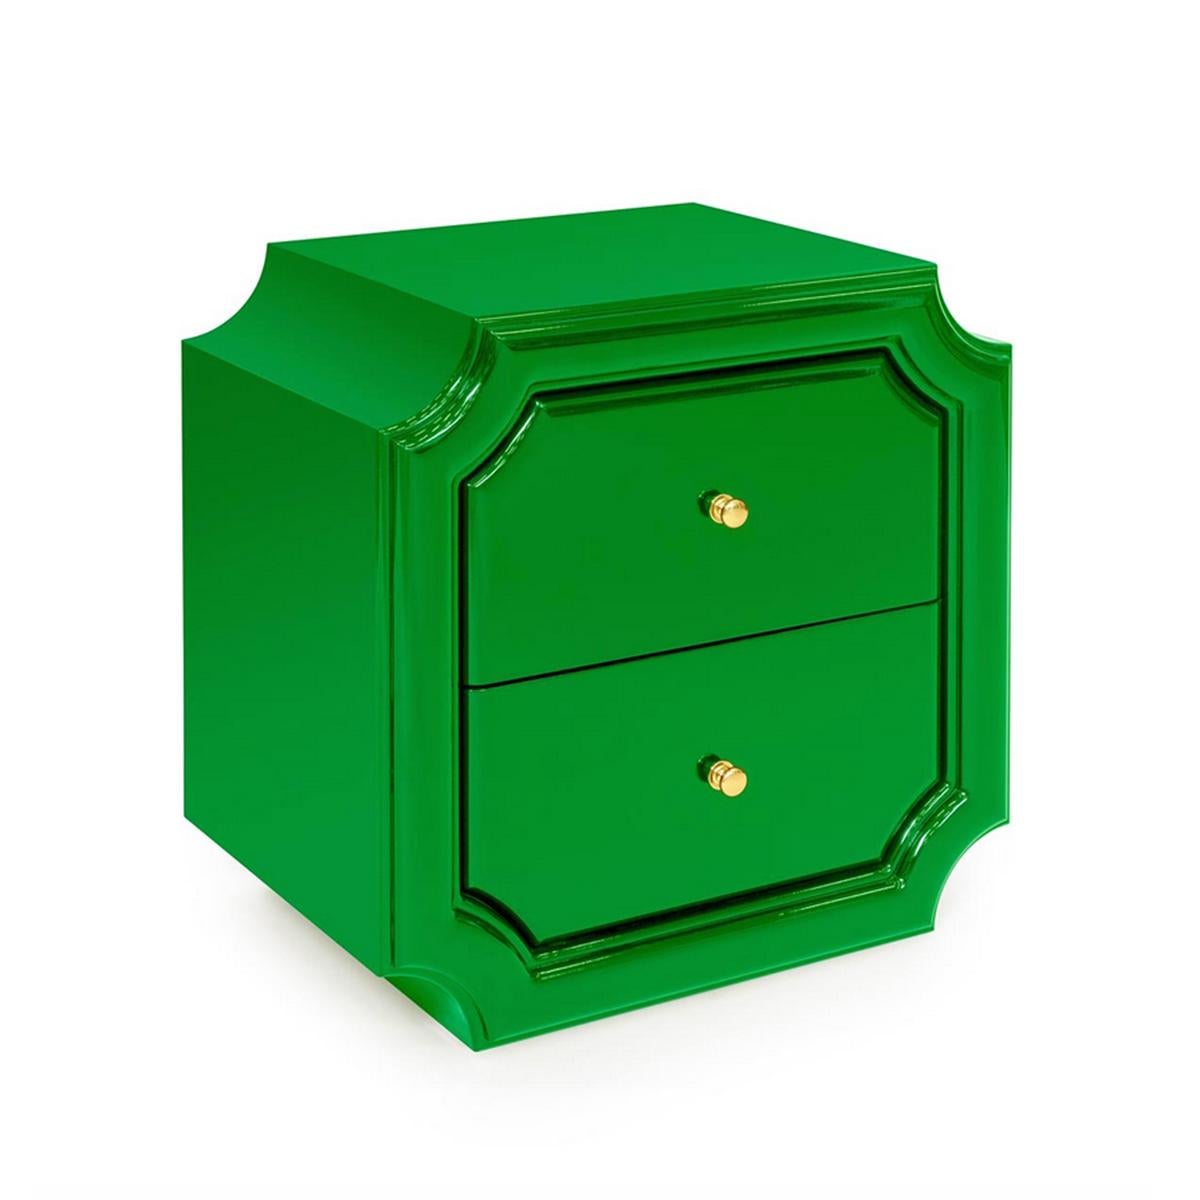 Side table Timeo green in solid wood
in green lacquered finish. With 2 drawers
with easy glide system on metal runners,
with brass button handles.